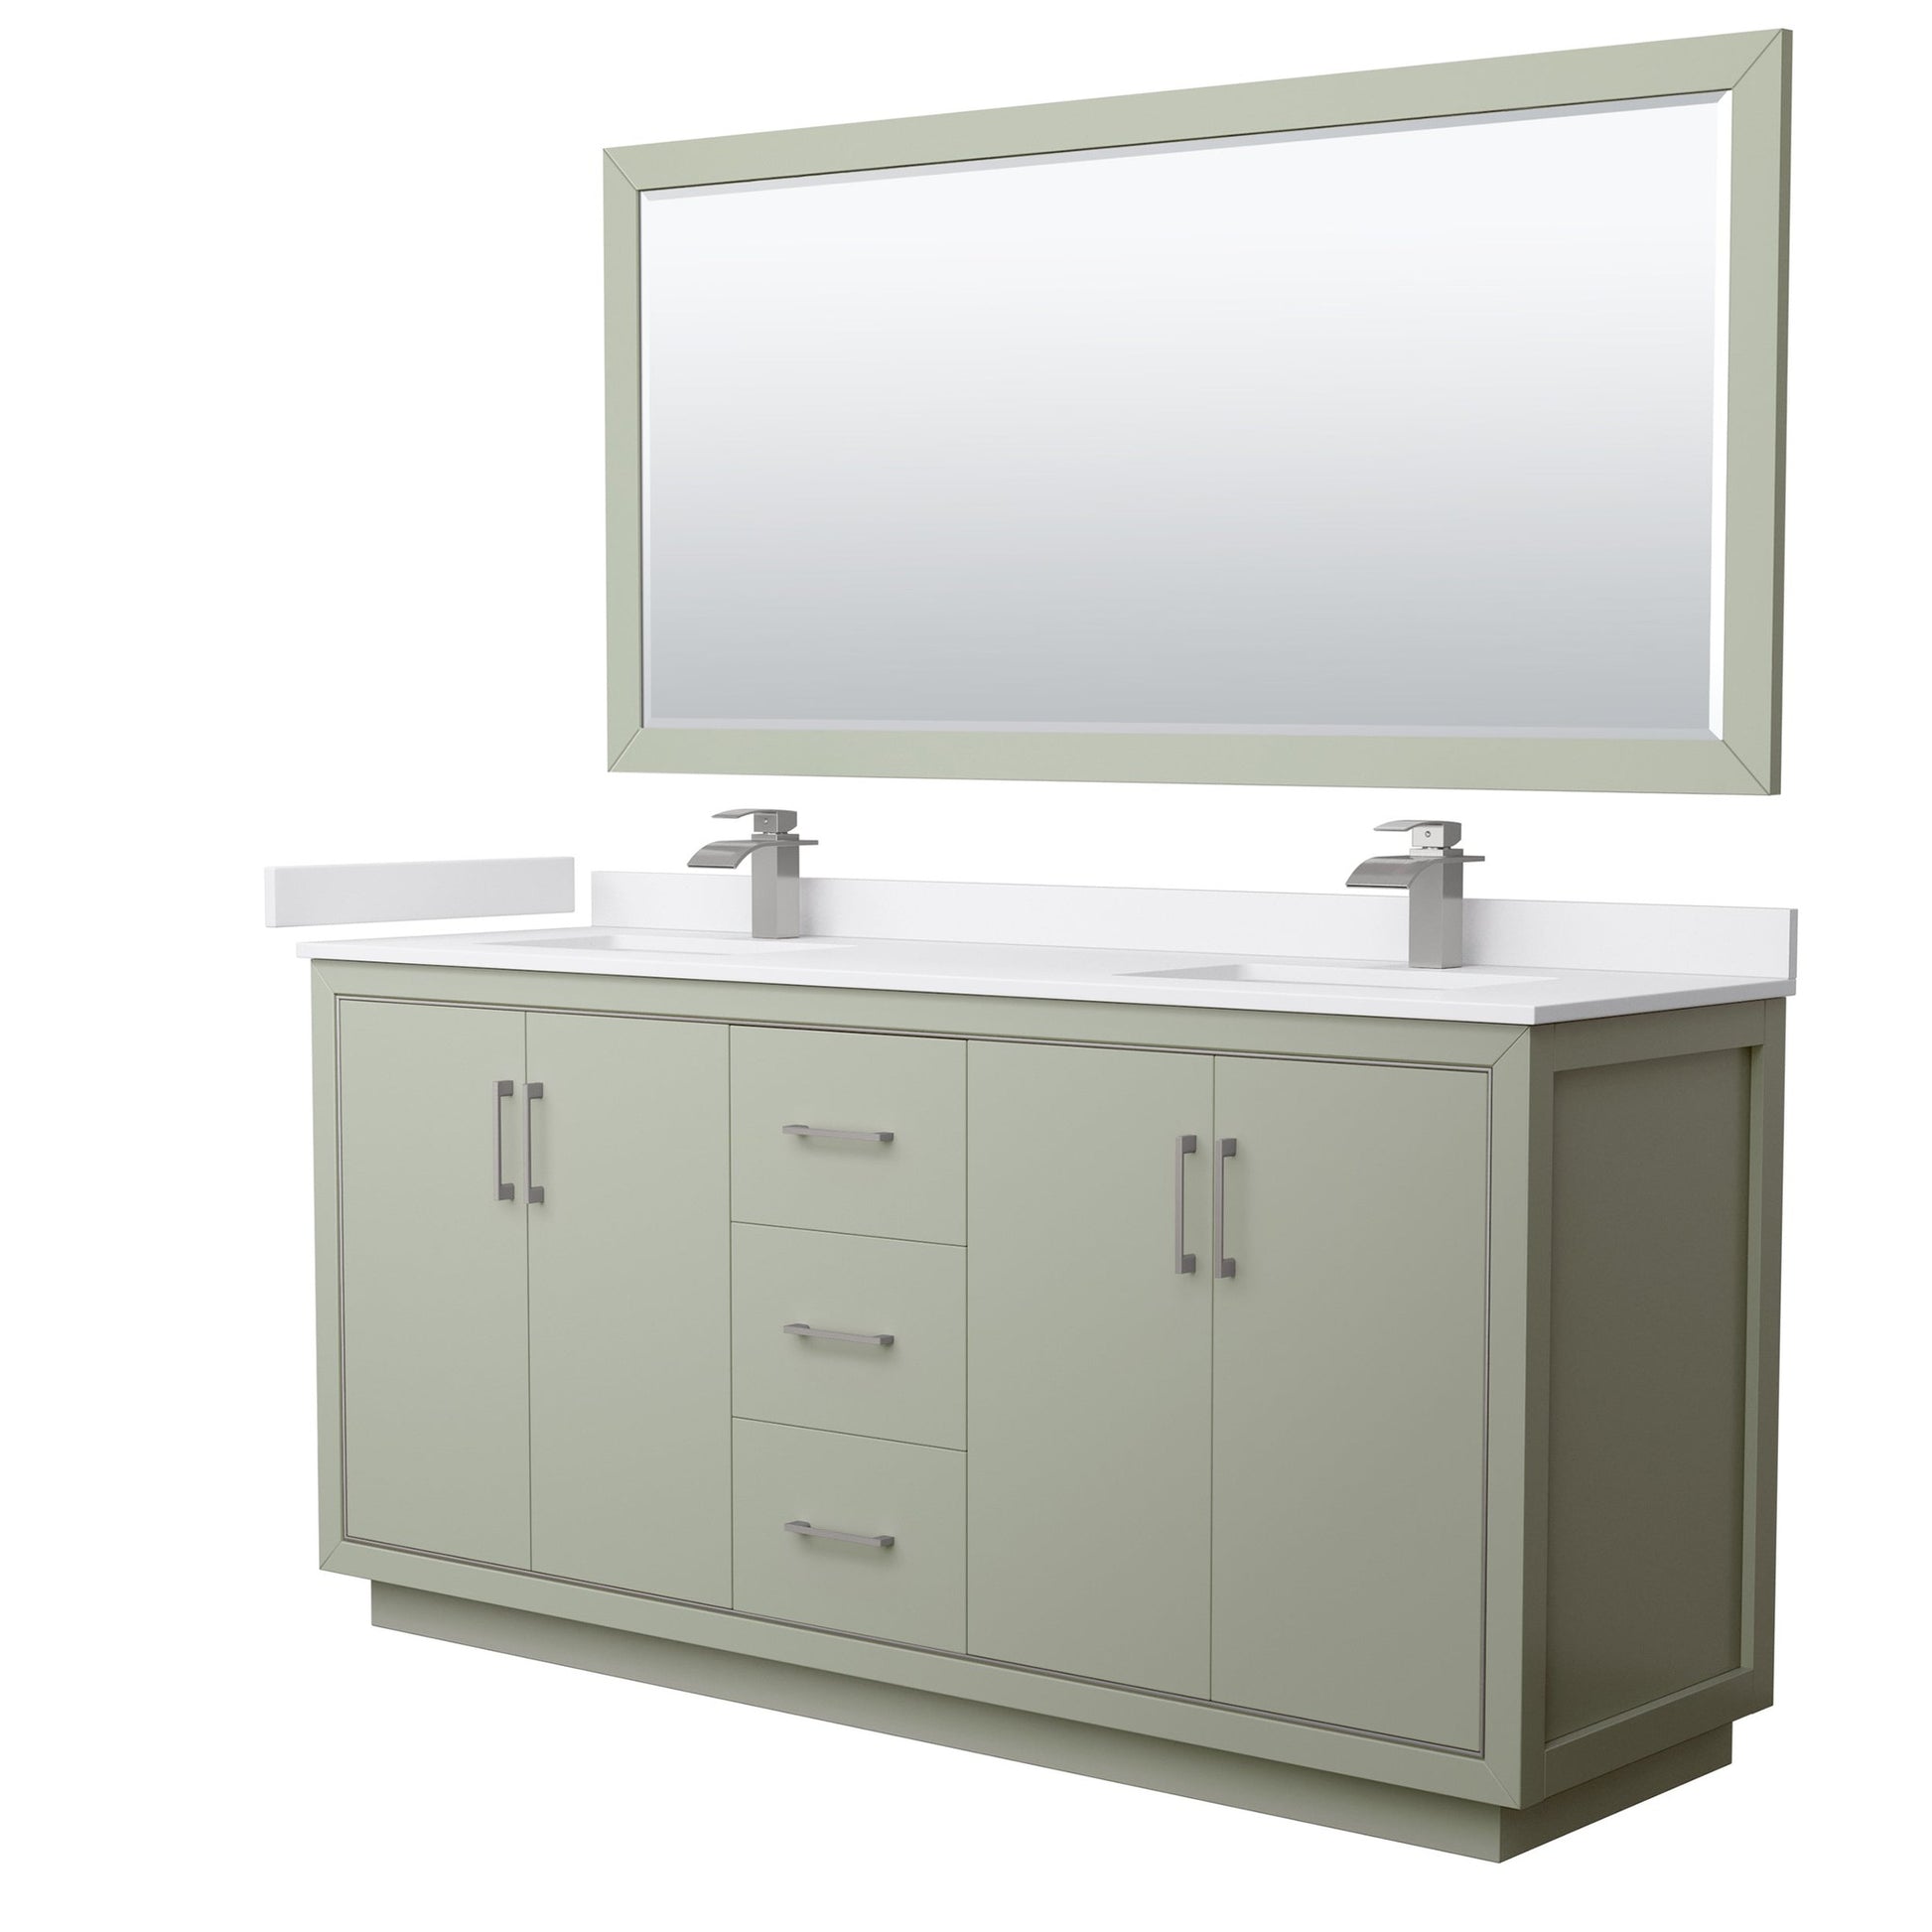 Wyndham Collection Icon 72" Double Bathroom Vanity in Light Green, White Cultured Marble Countertop, Undermount Square Sinks, Brushed Nickel Trim, 70" Mirror